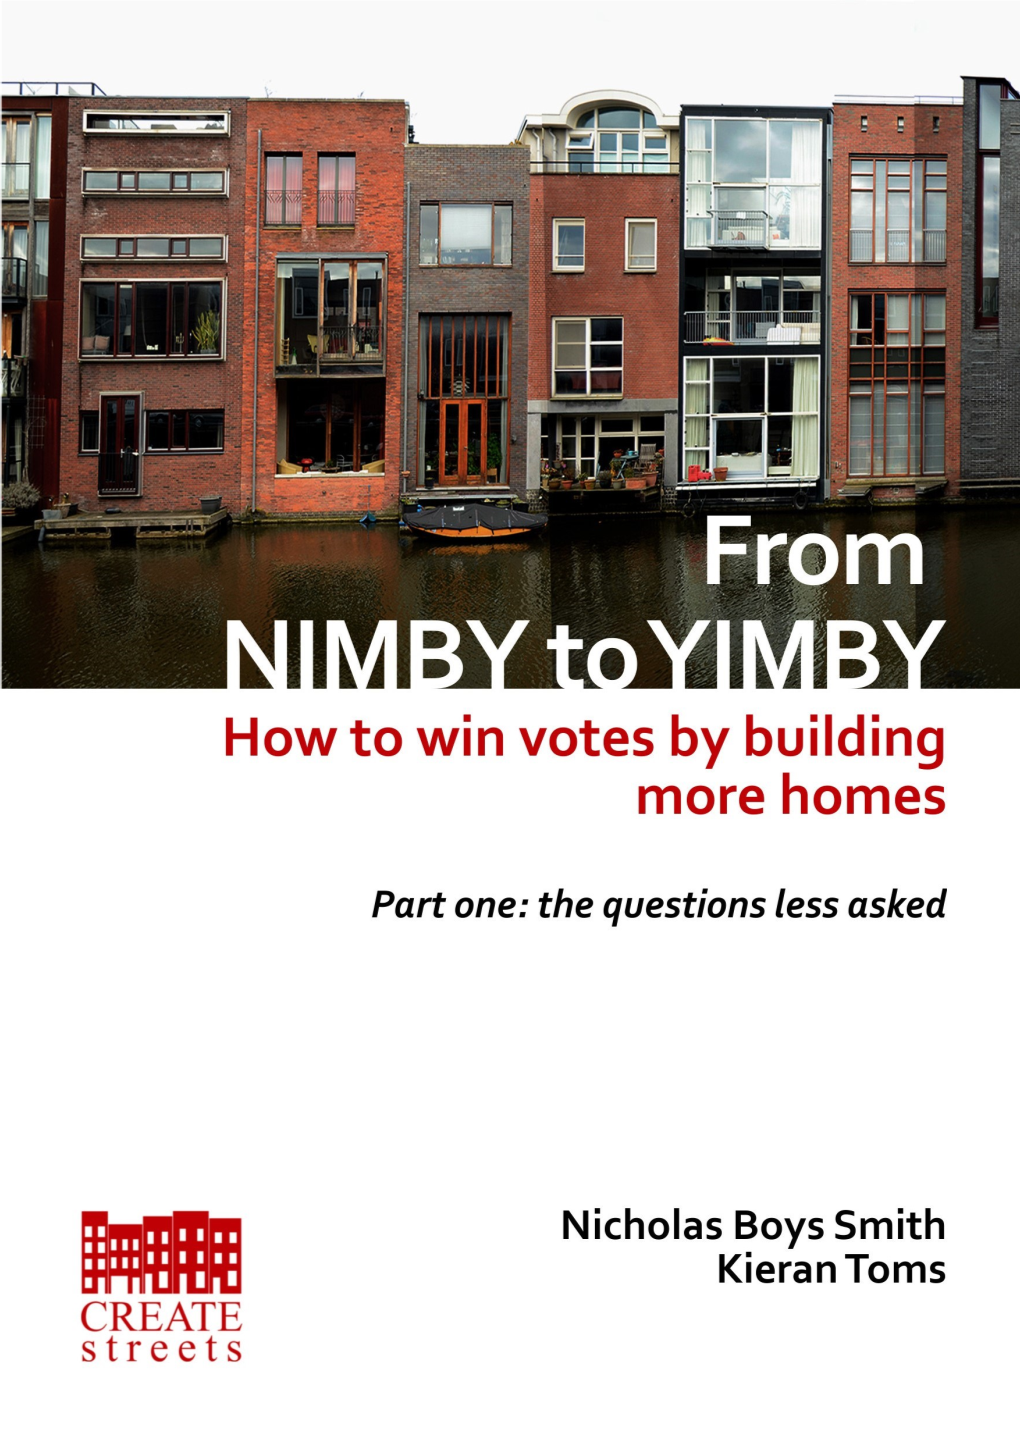 NIMBY to YIMBY: How to Win Votes by Building More Homes Part One: the Questions Less Asked